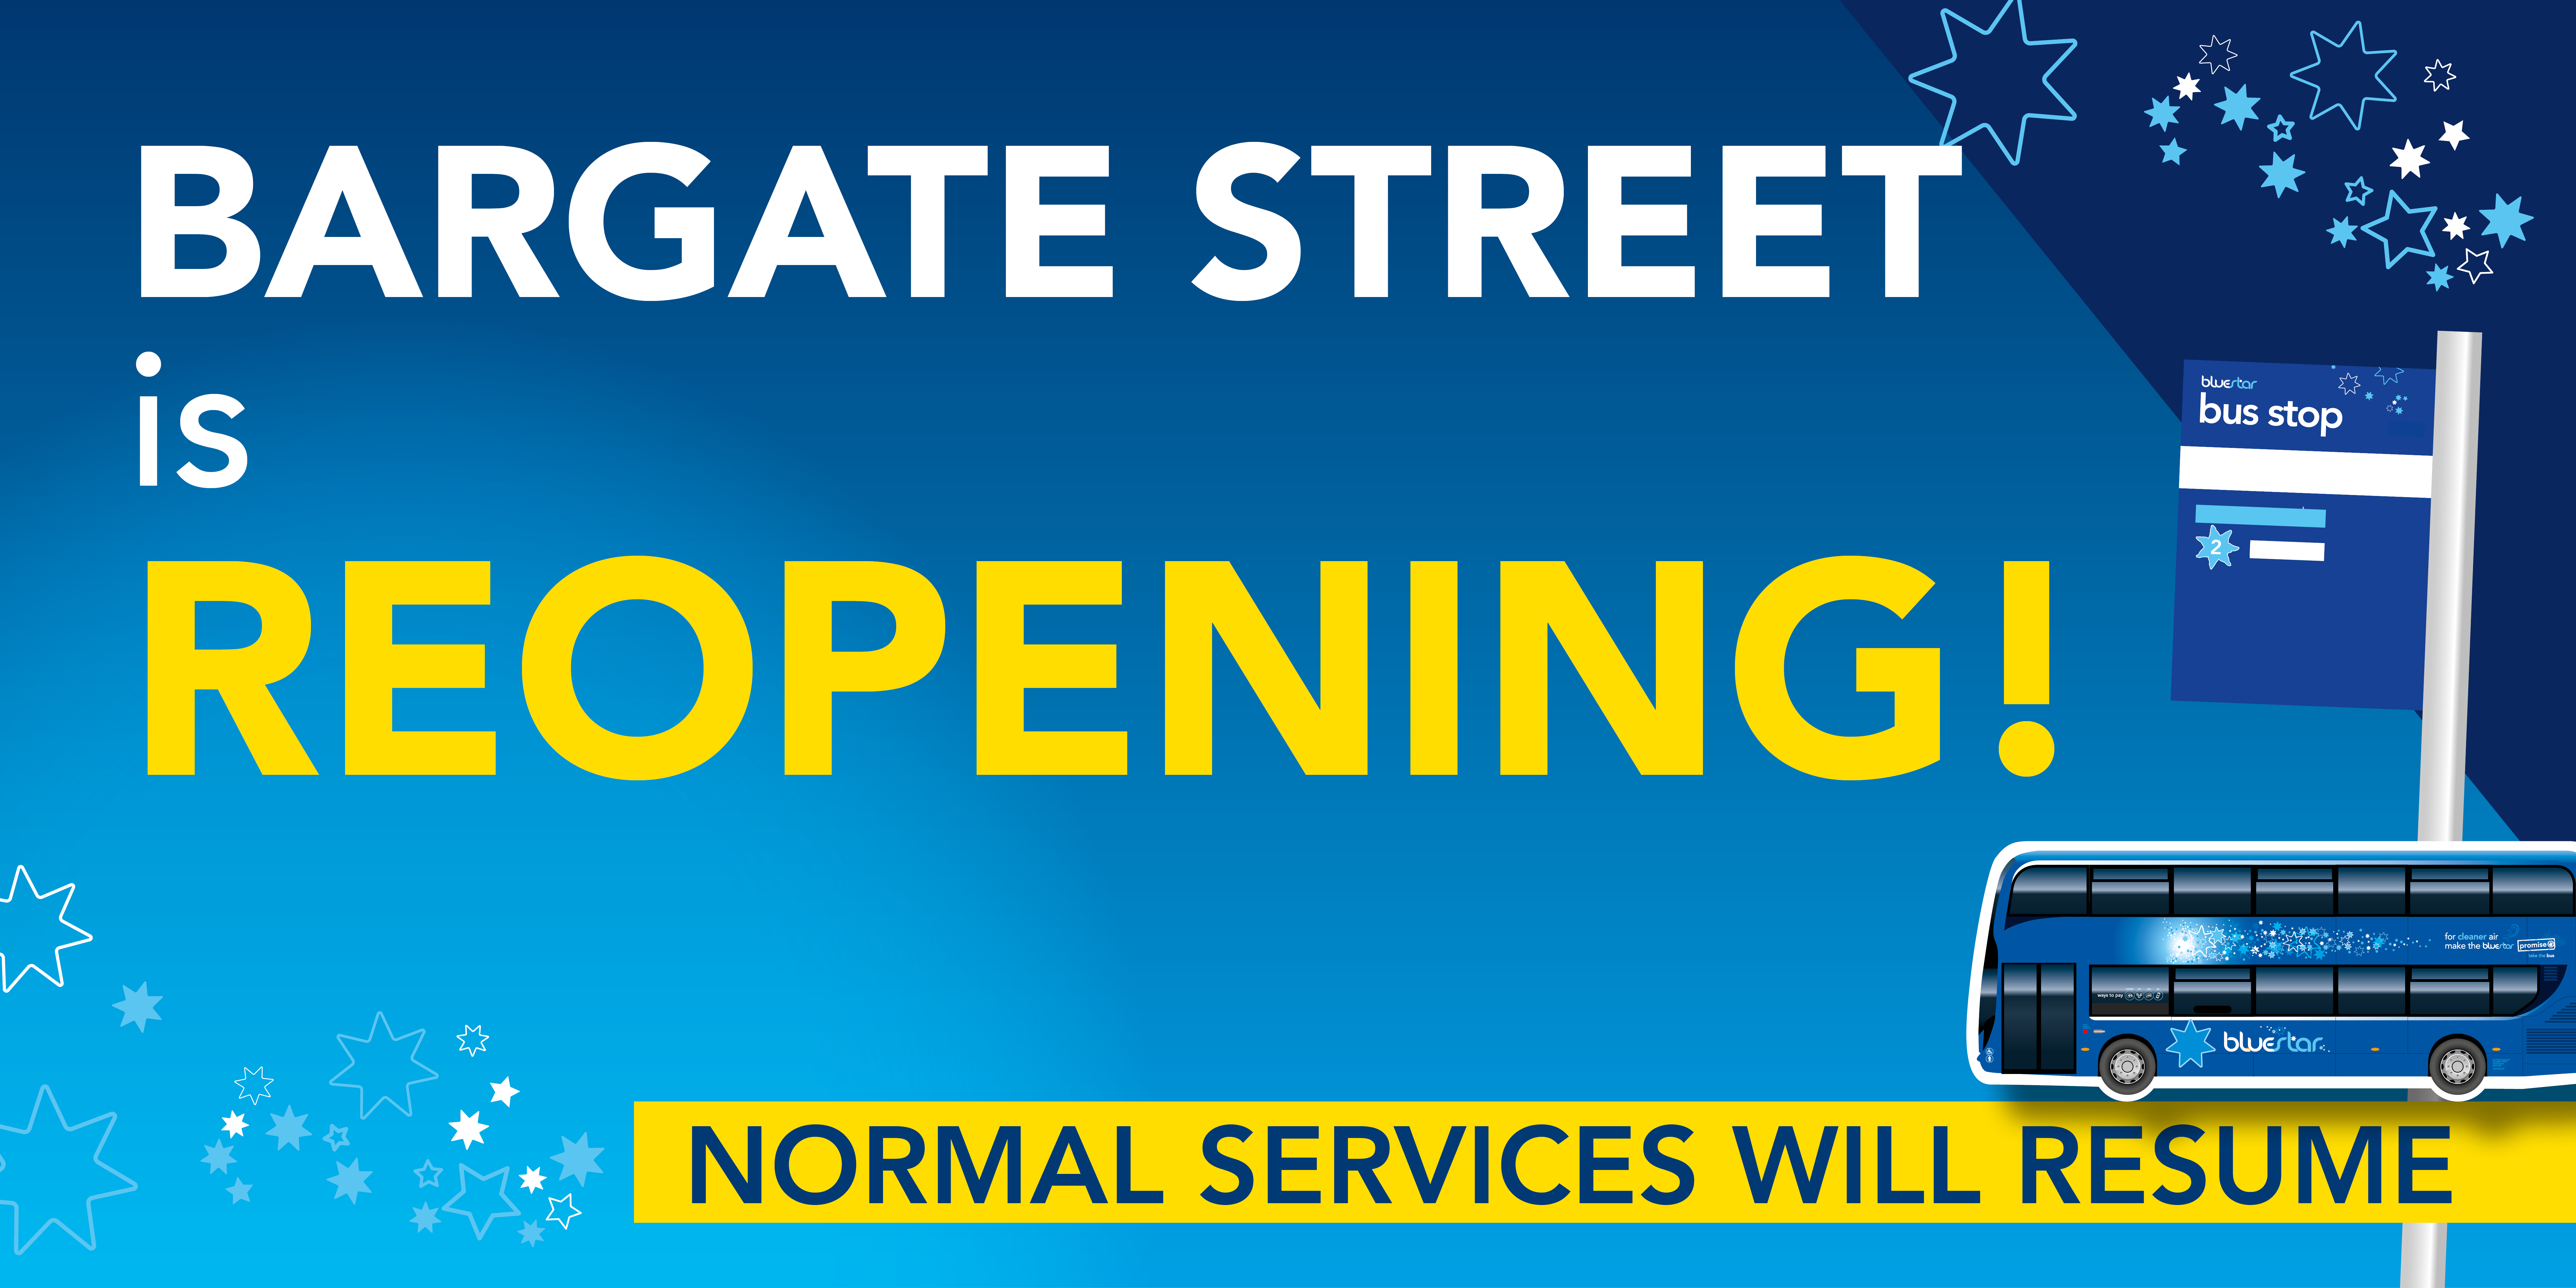 Bargate Street is reoping, normal services will resume